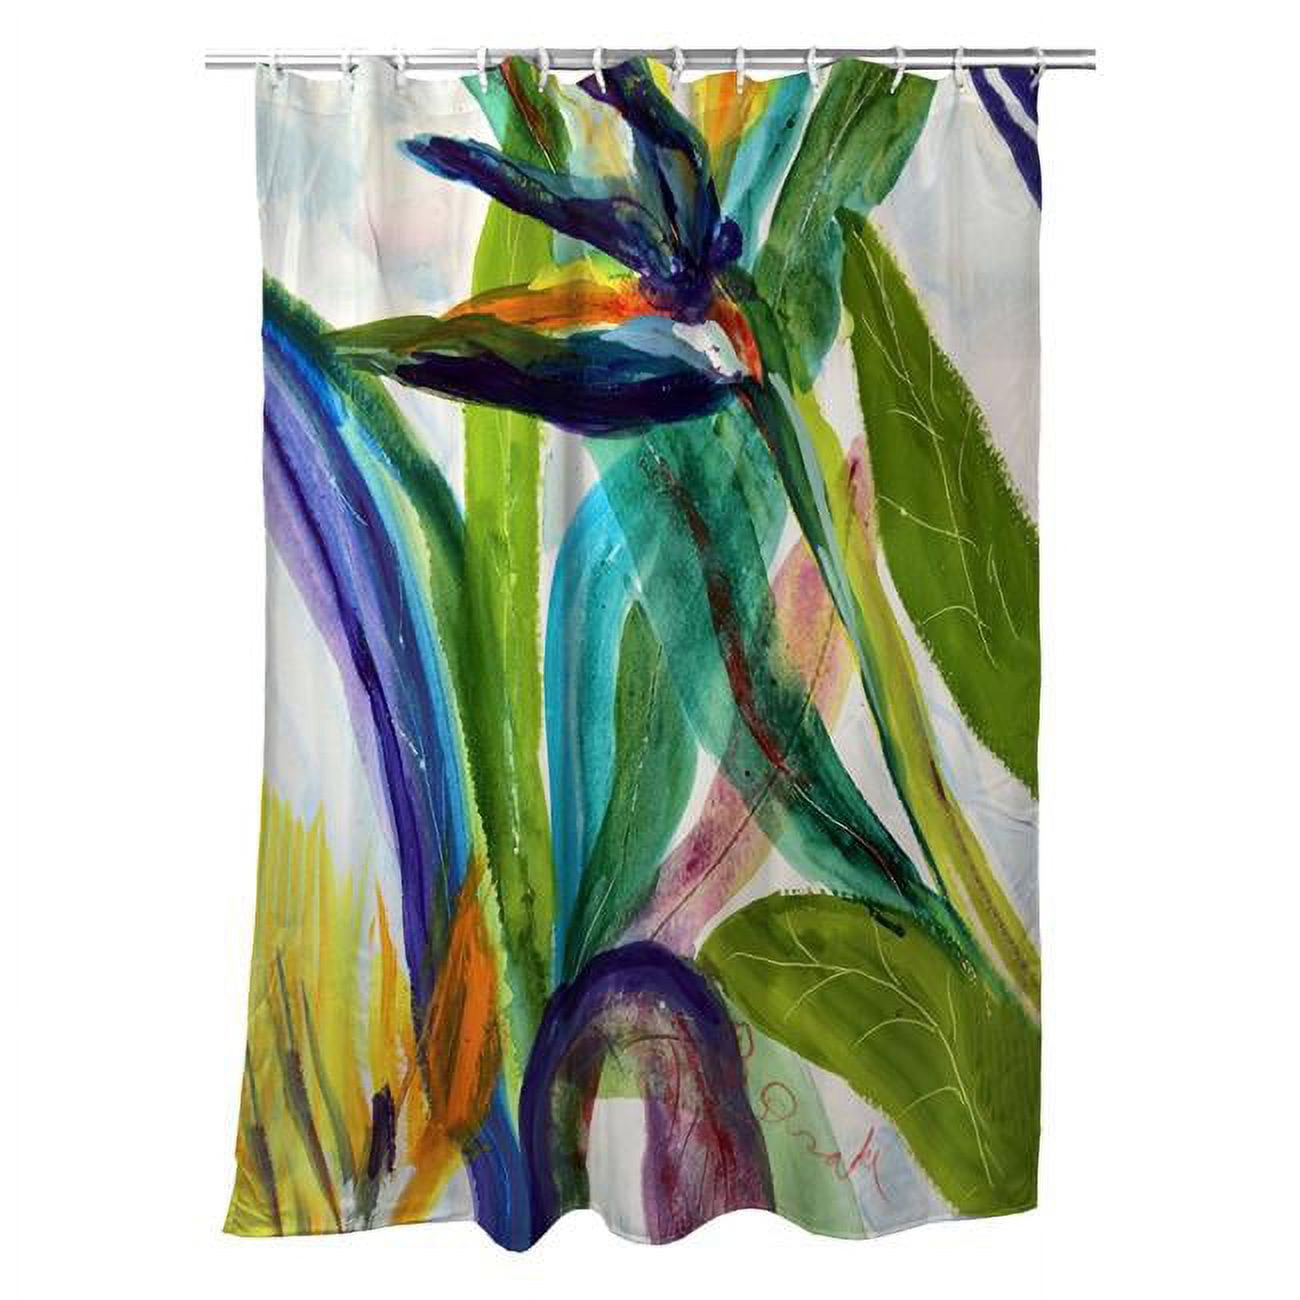 Picture of Betsydrake SH1162 71 x 74 in. Teal Paradise II Shower Curtain